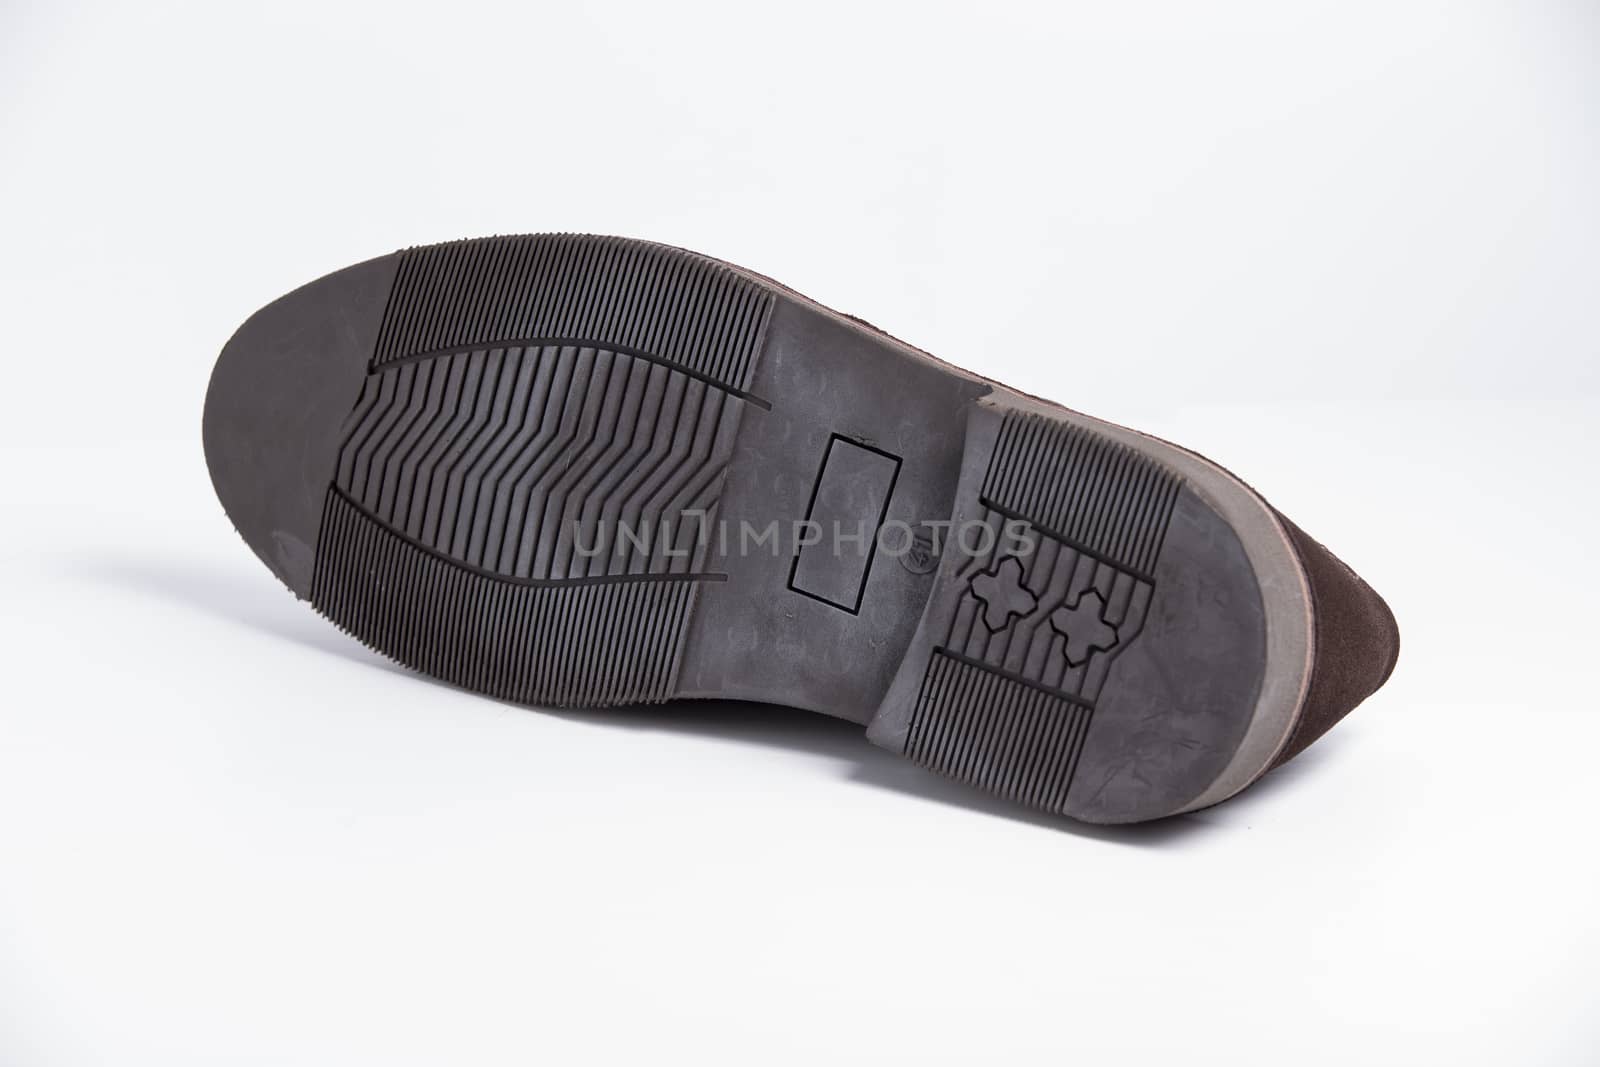 Male brown leather shoe on white background, isolated product, top view.